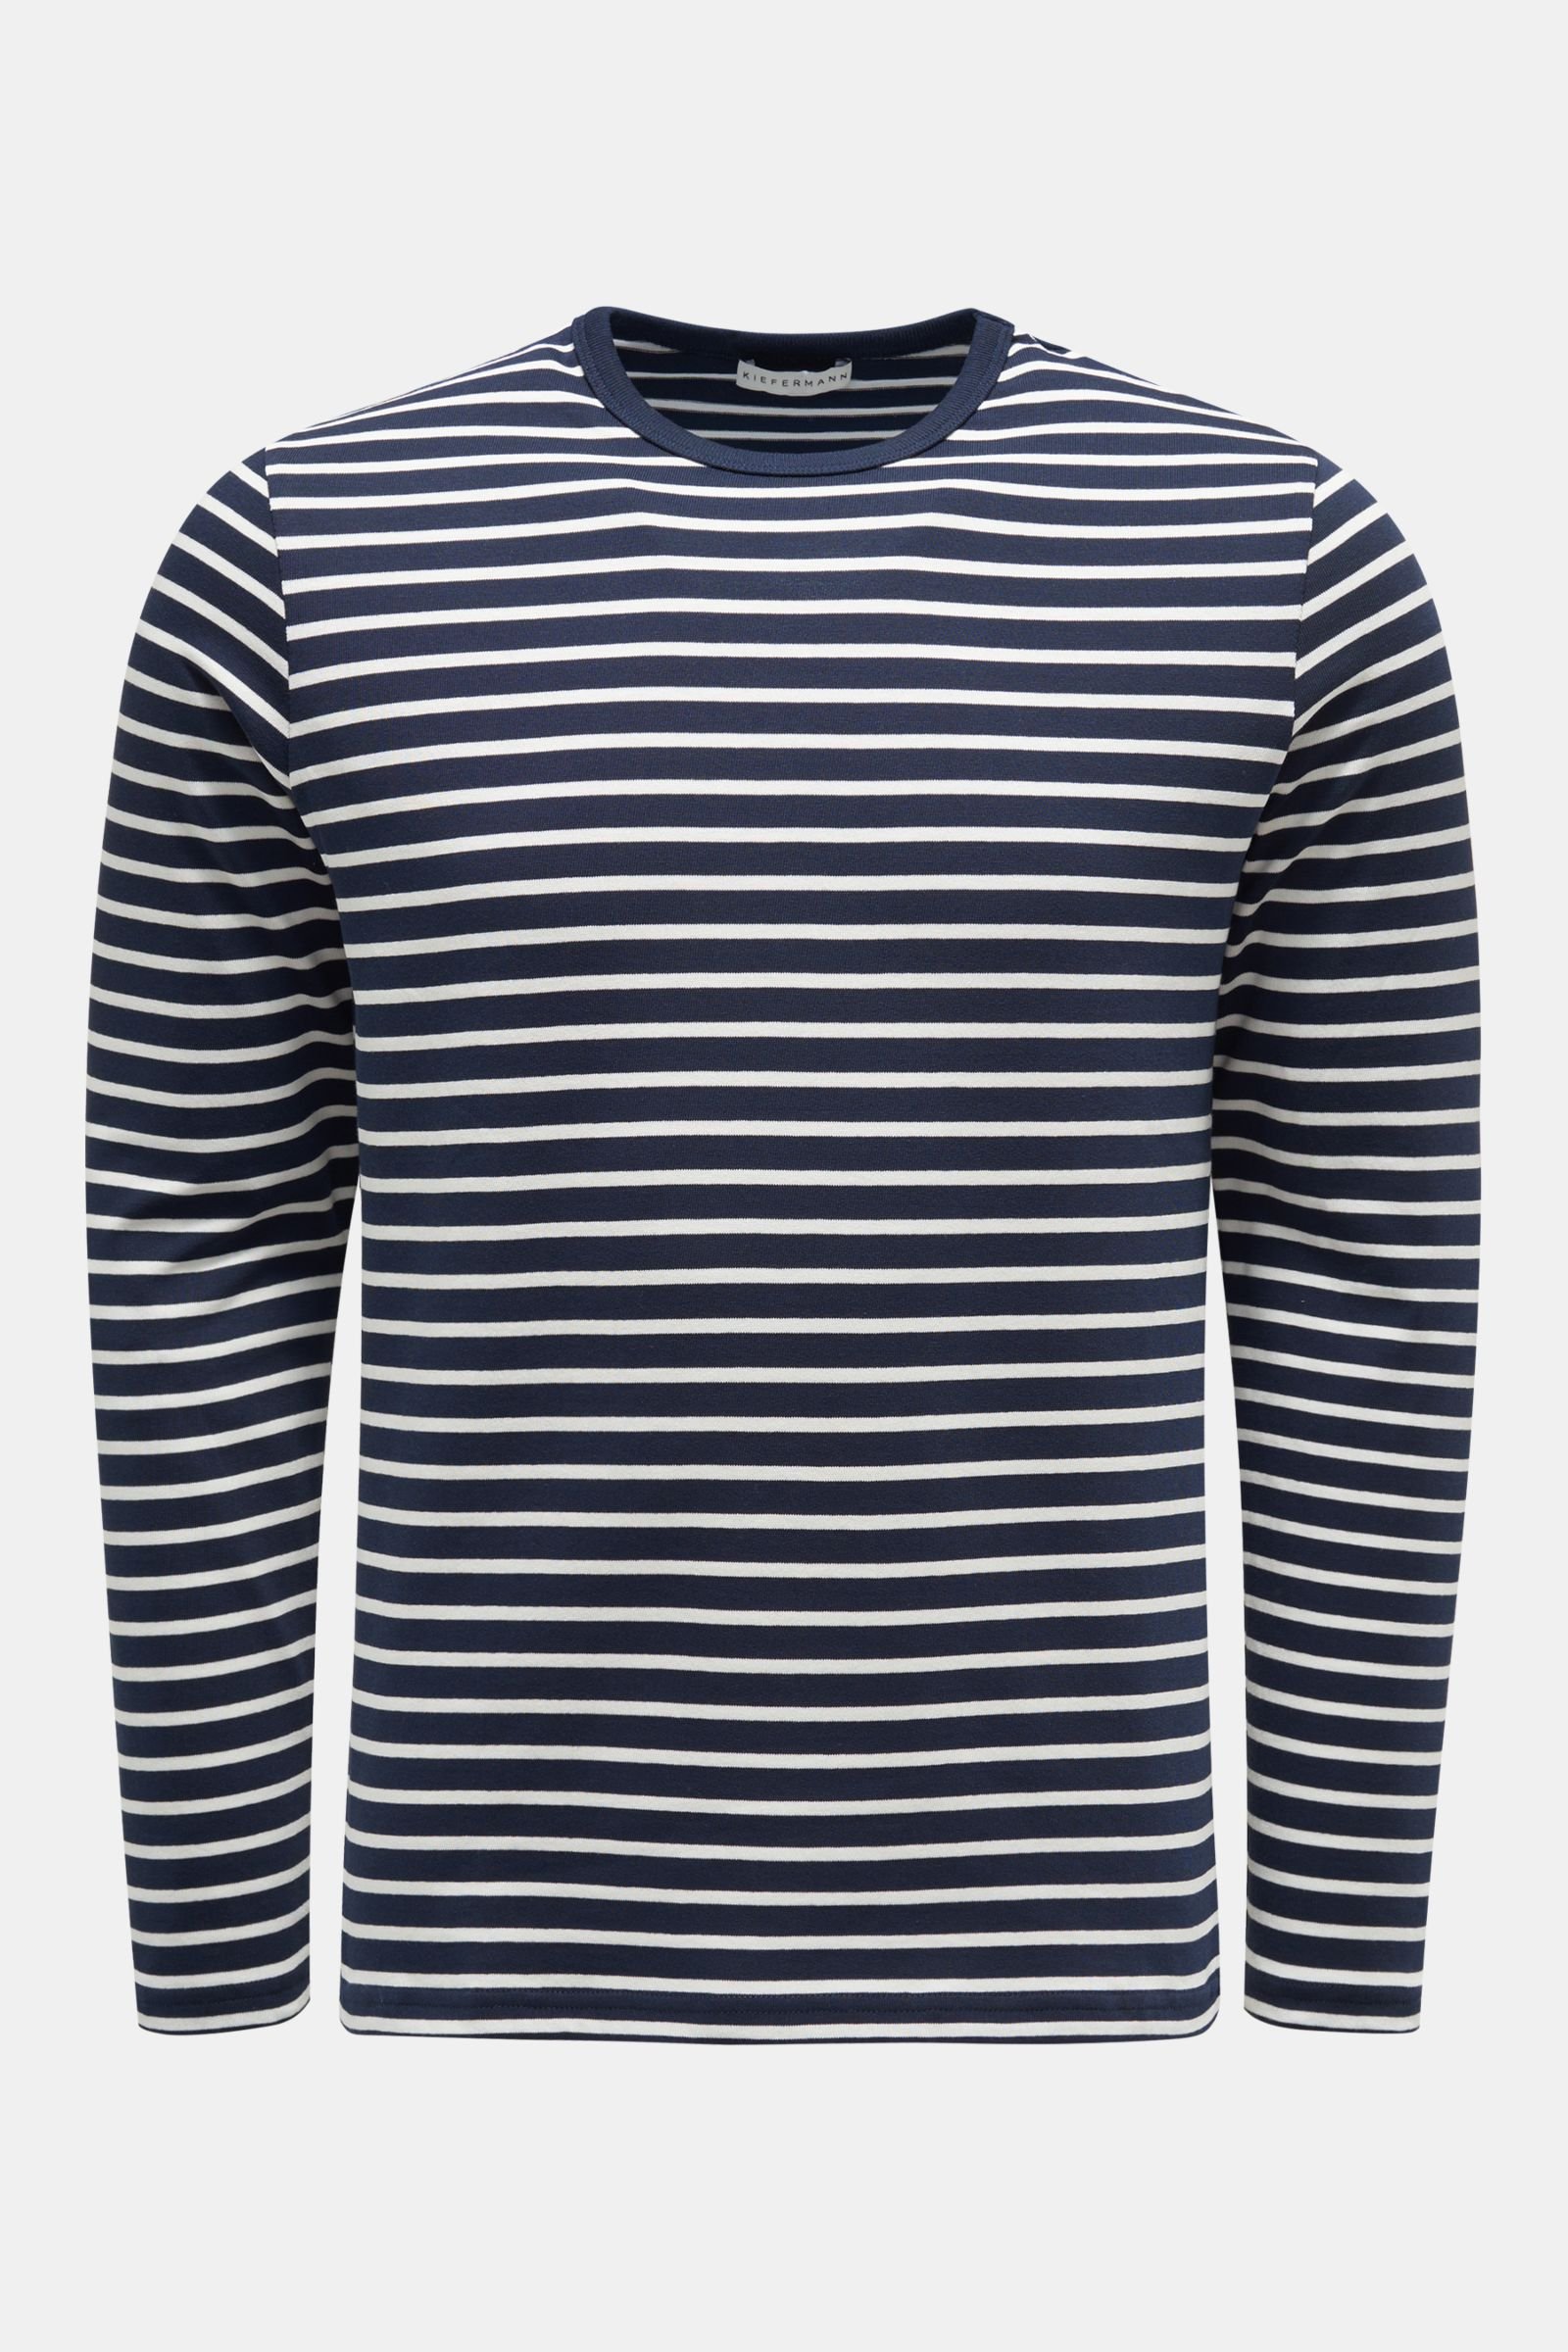 Crew neck long sleeve 'Chuck' navy/off-white striped